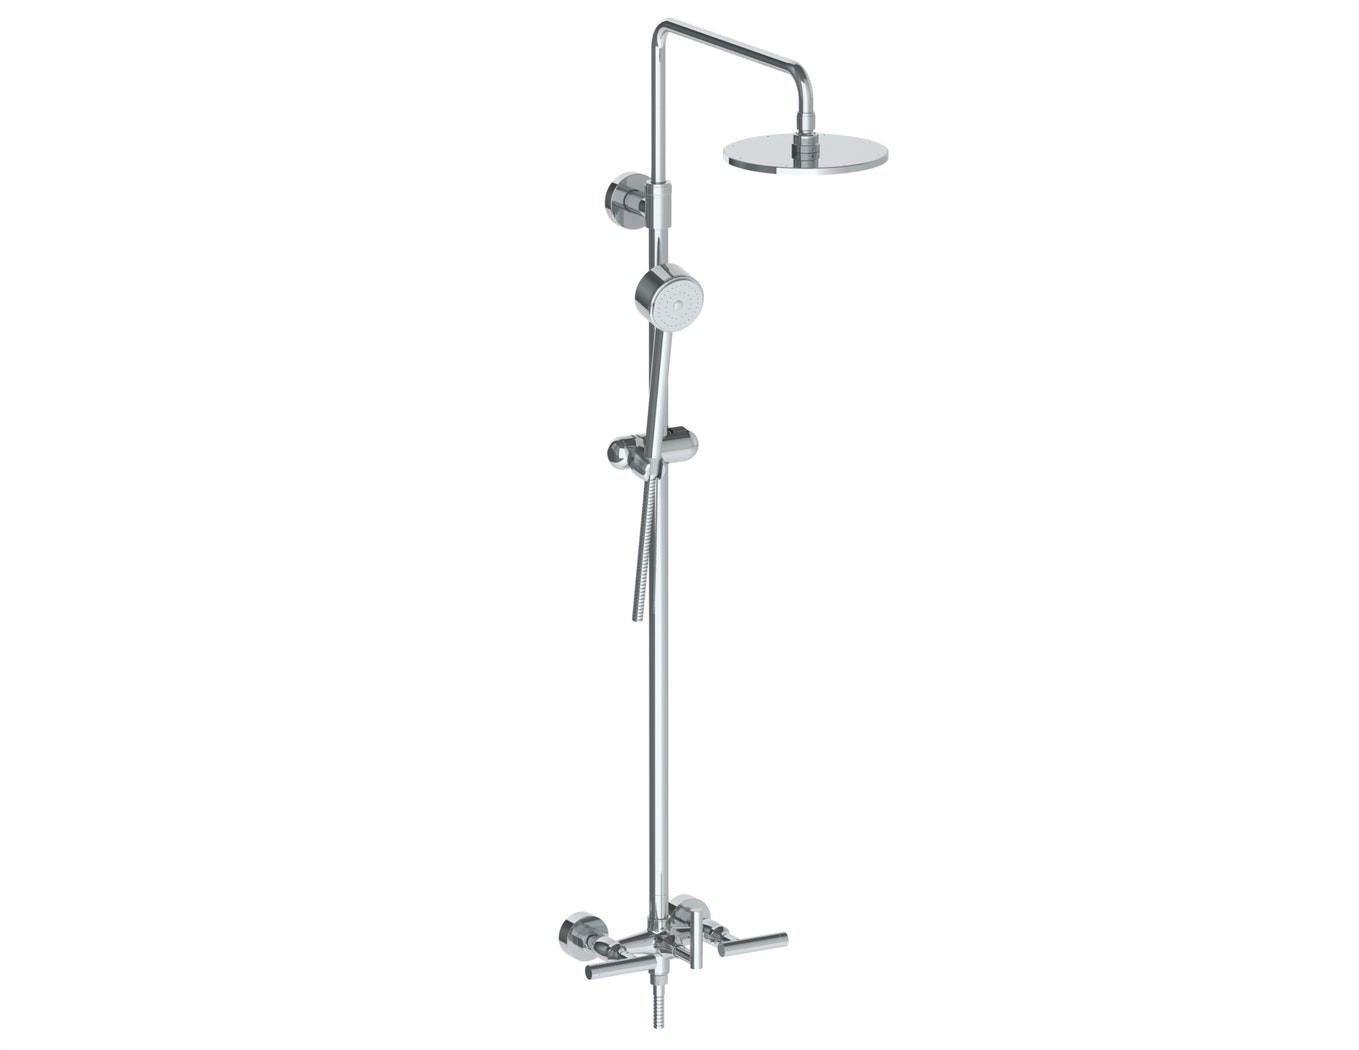 WATERMARK 25-6.1HS URBANE 56 1/8 INCH WALL MOUNT EXPOSED THERMOSTATIC SHOWER WITH HAND SHOWER SET